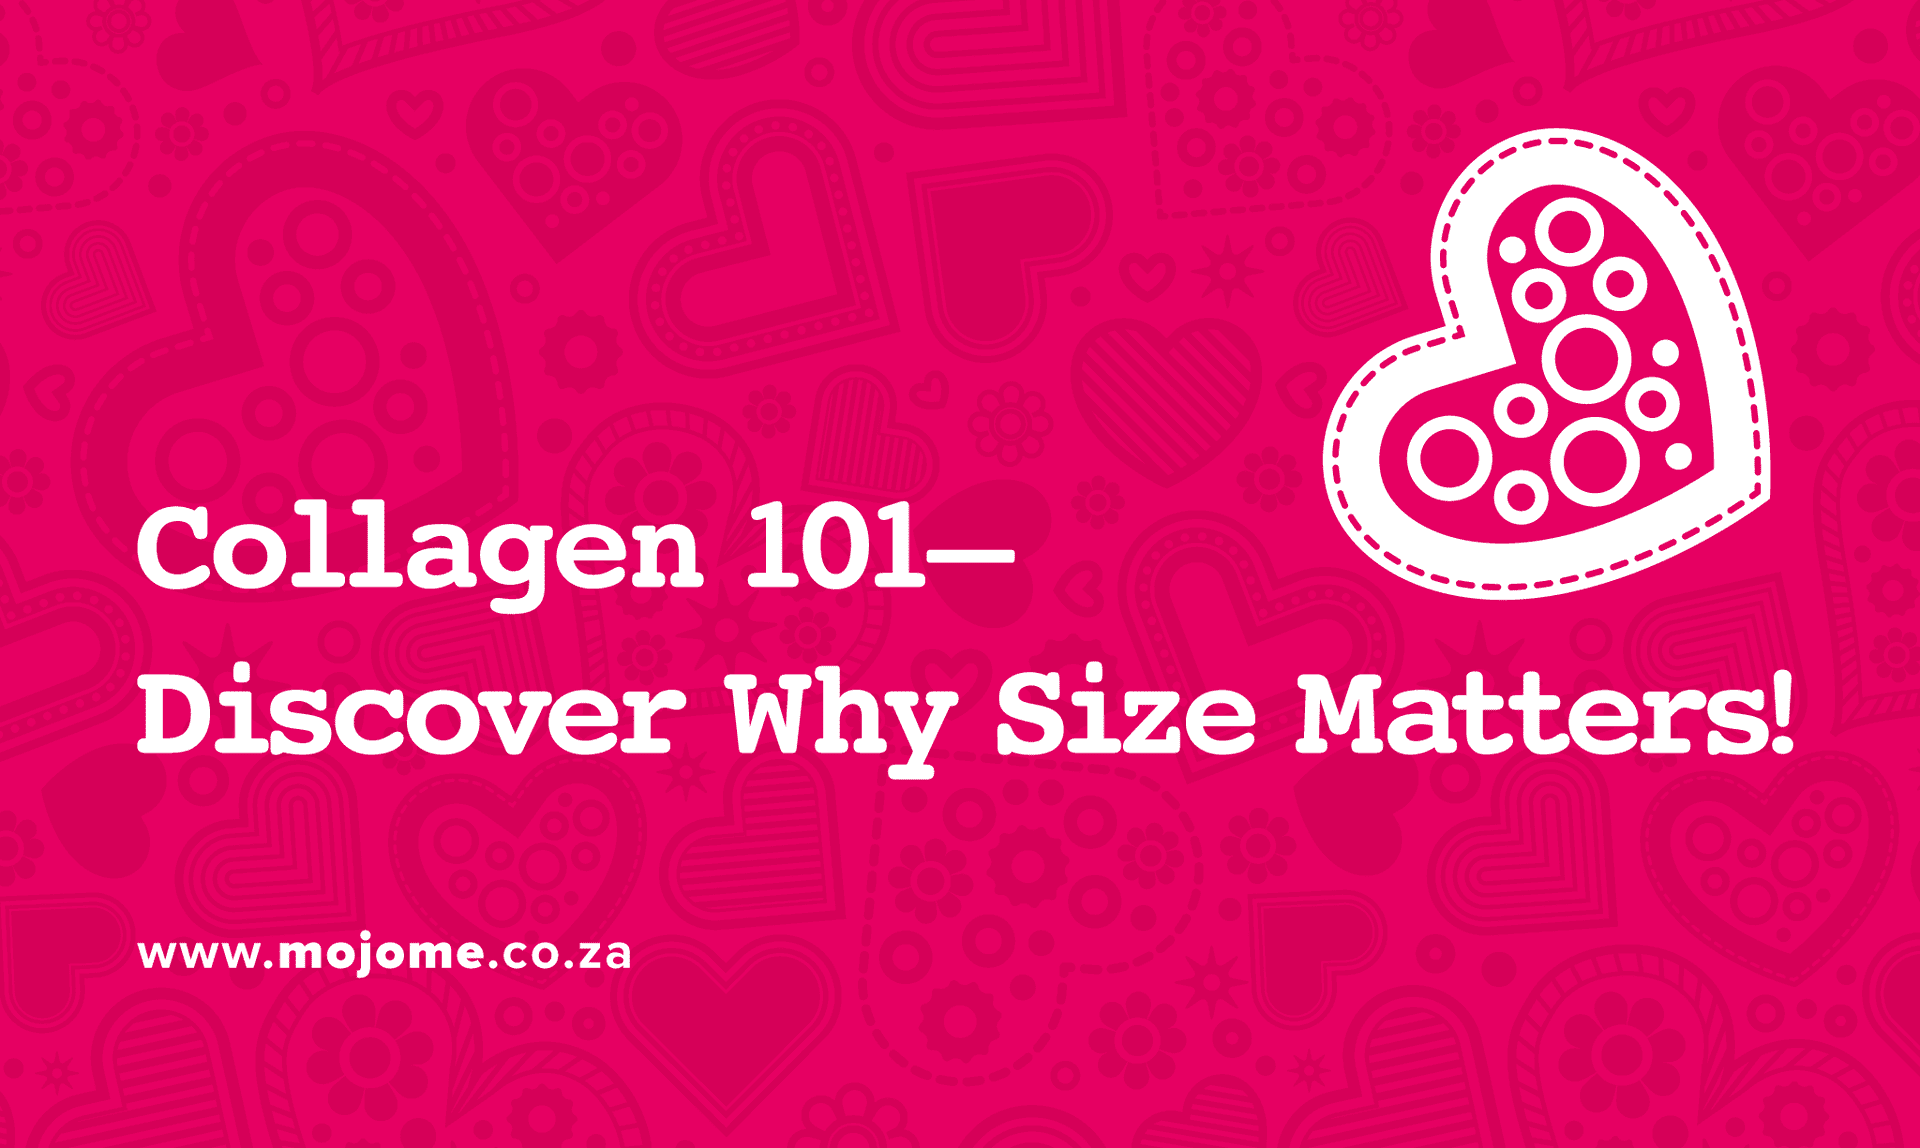 Collagen 101: Discover Why Size Matters! 5